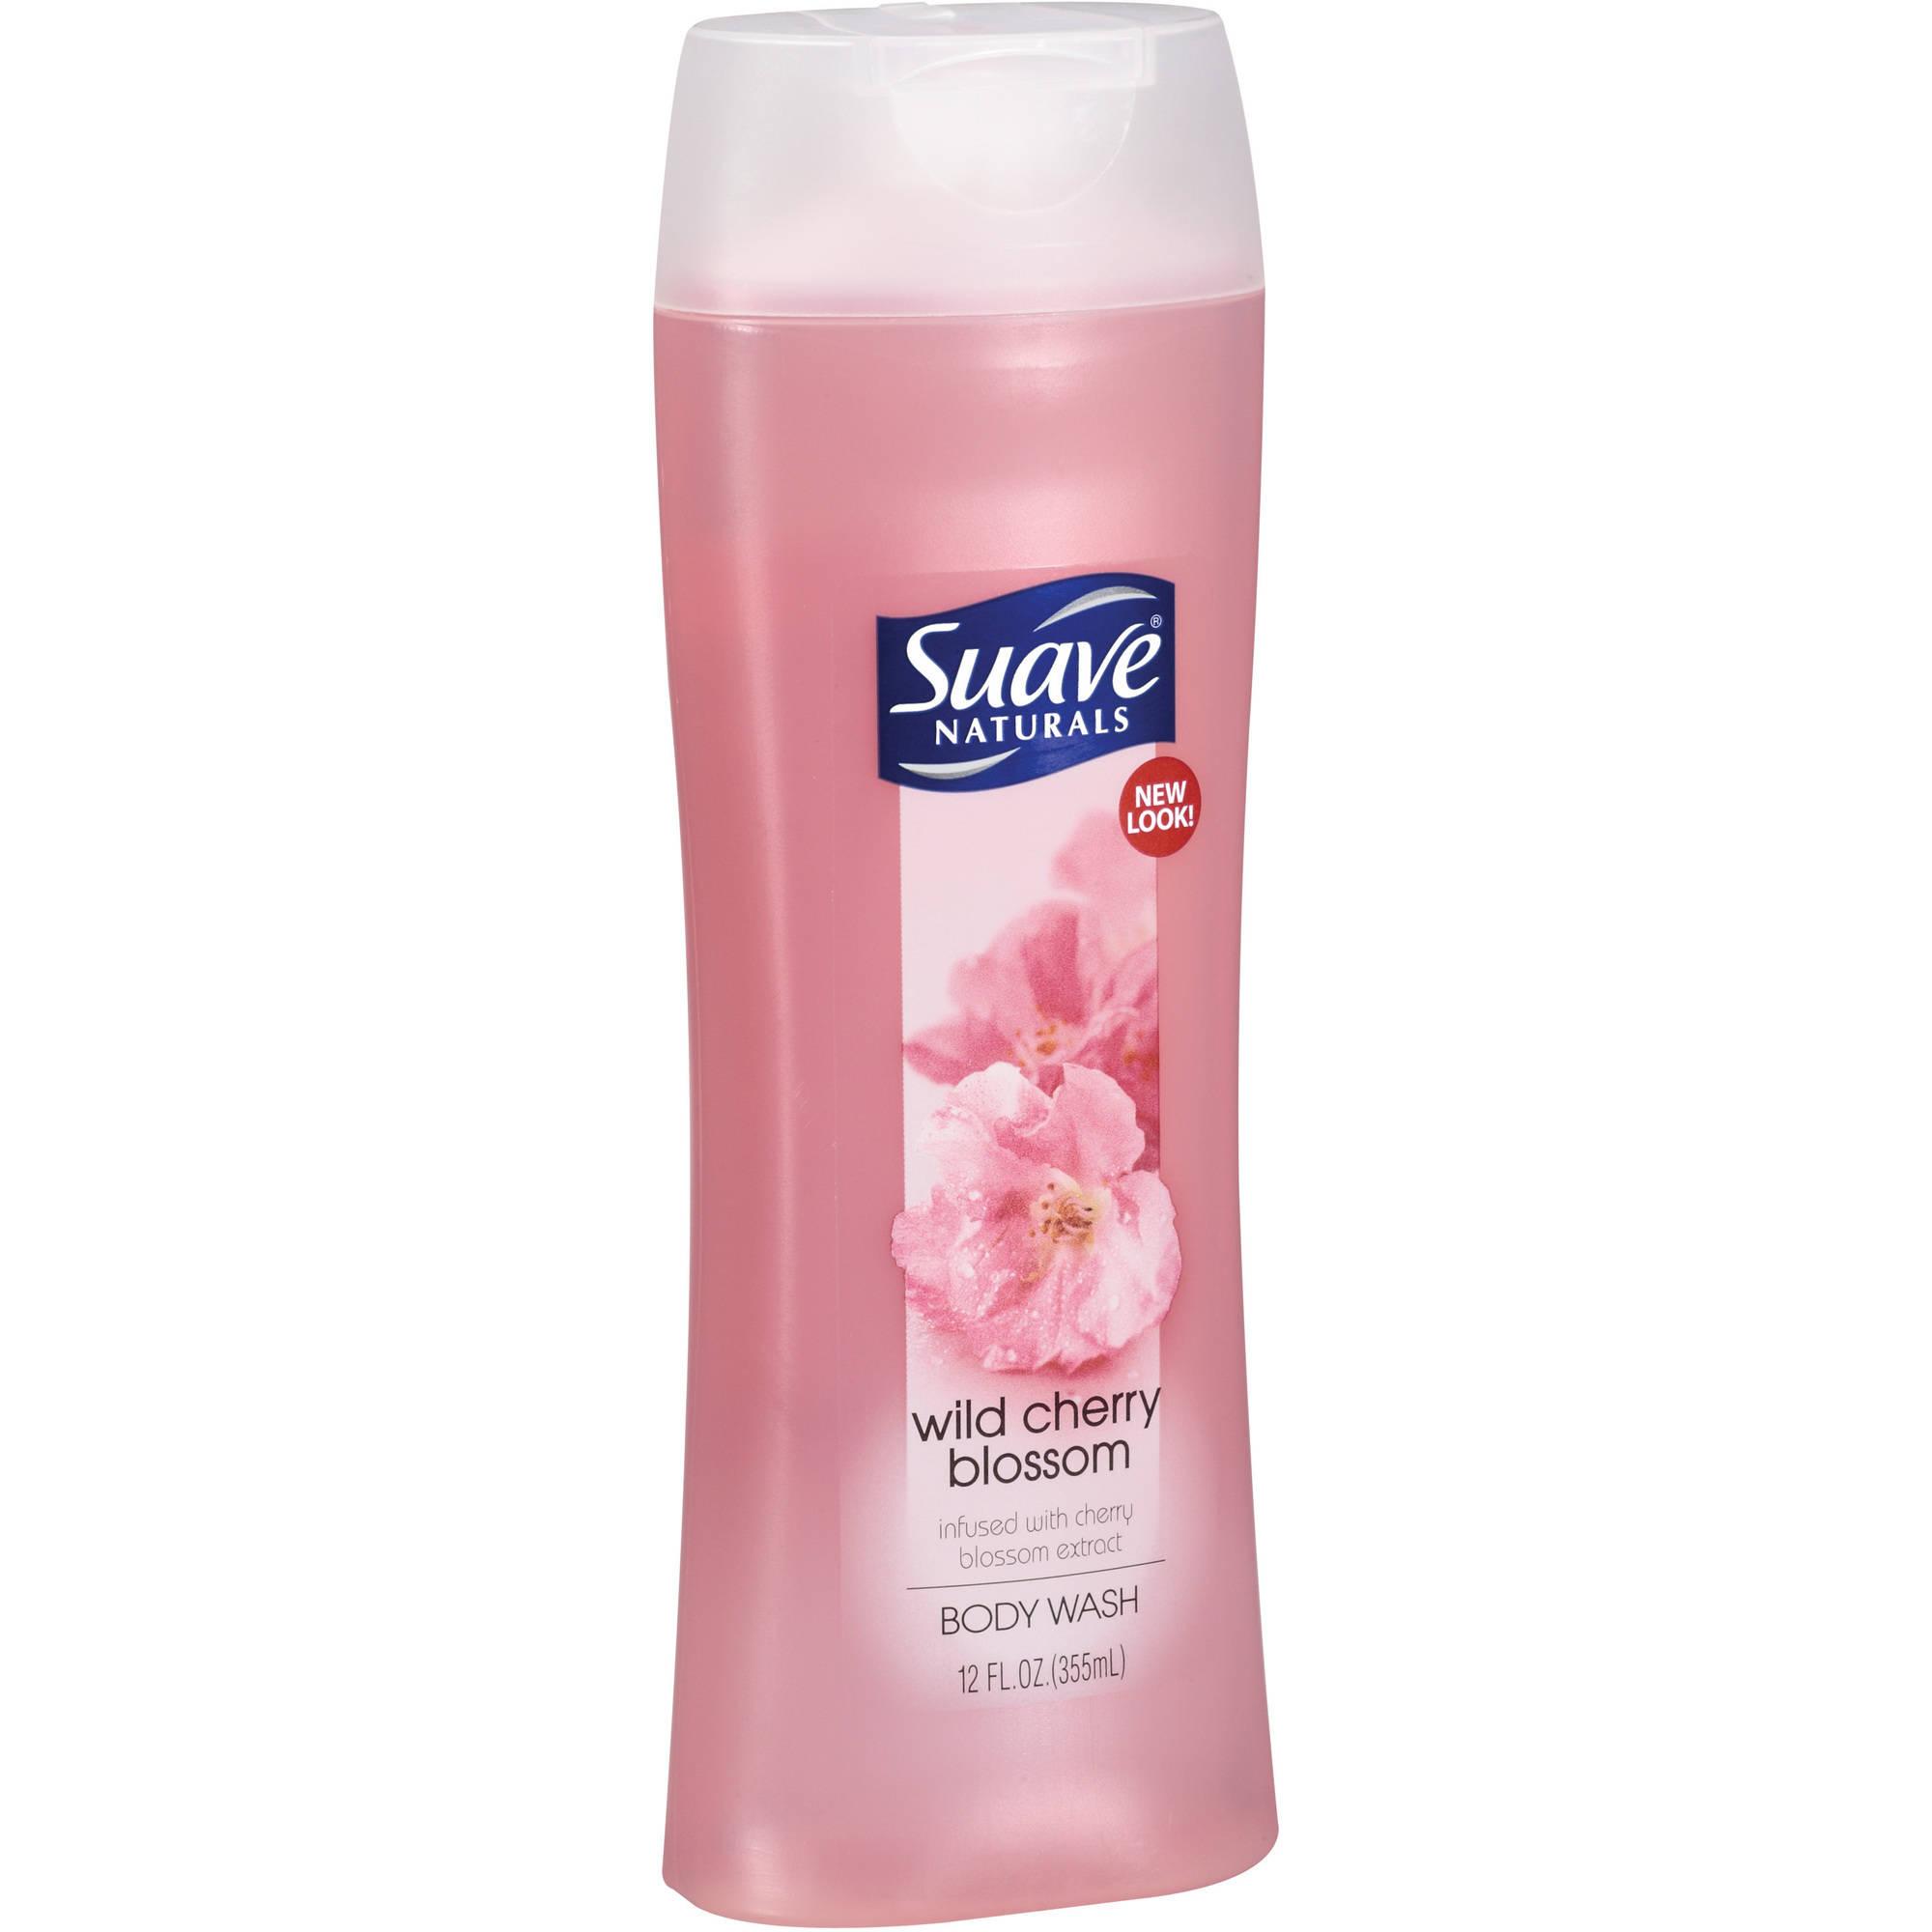 Suave's cherry blossom body wash leaves your skin feeling smooth and refreshed. (Photo: Suave)